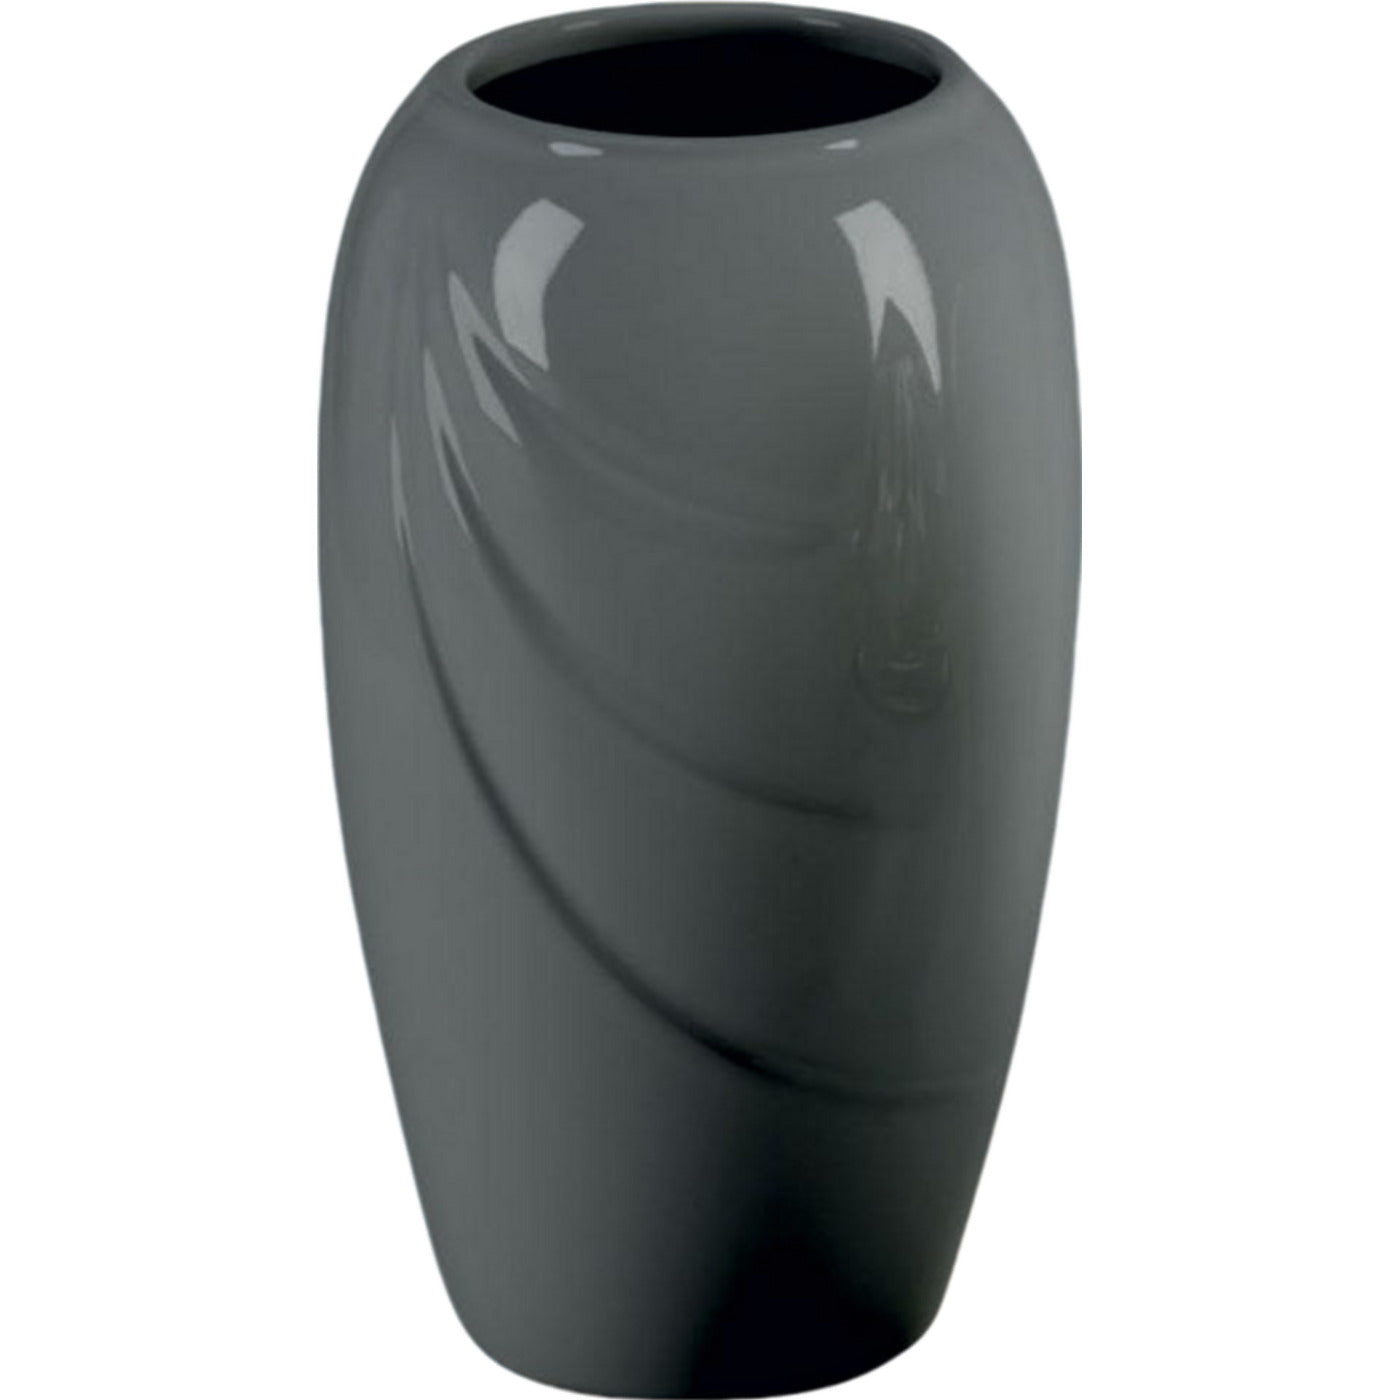 Grave vase Ecotre gray 21x13cm - 8.3x5.1in In gray porcelain, ground attached ECO150T/G